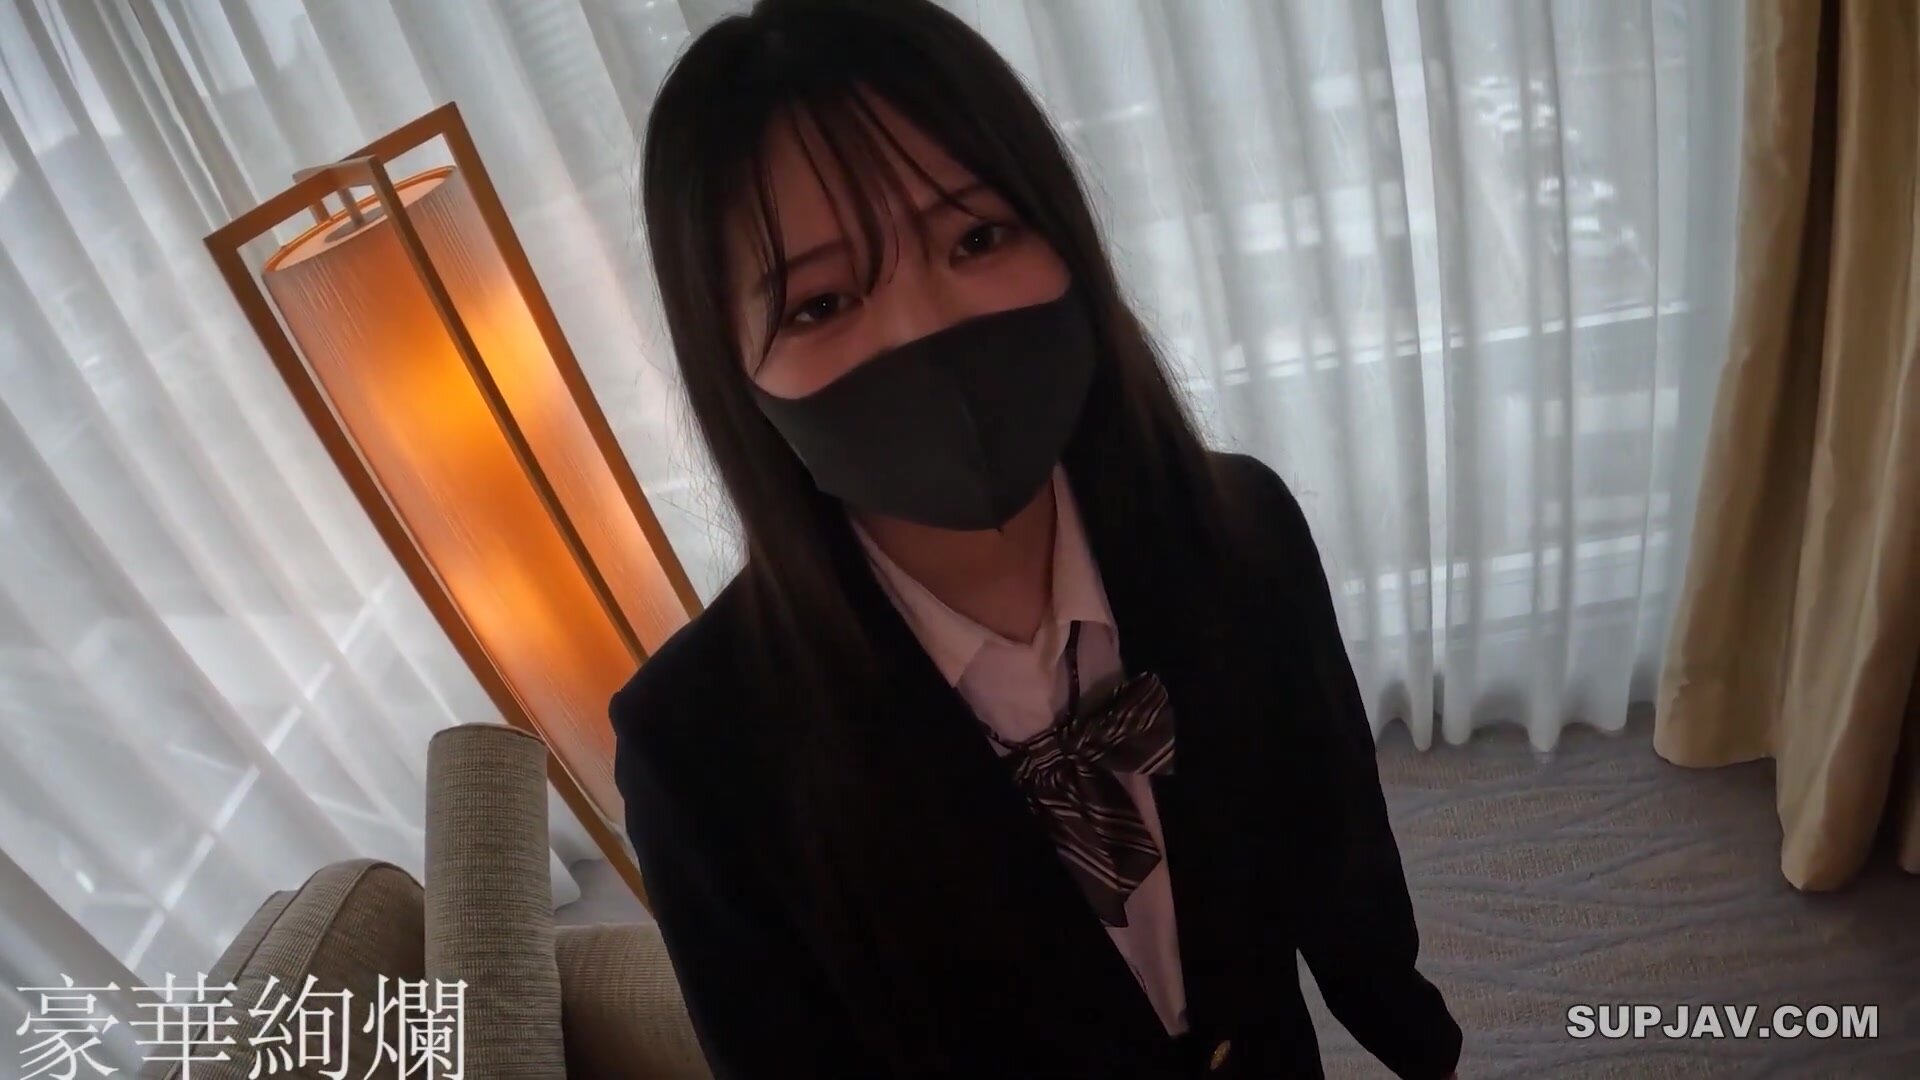 [Super dangerous work * Permanent preservation version] Shocking new account start! Successful candidate for a super-famous idol group. Over 500,000 followers on private SNS! Shocking private footage of an 18-year-old peerless beauty**!